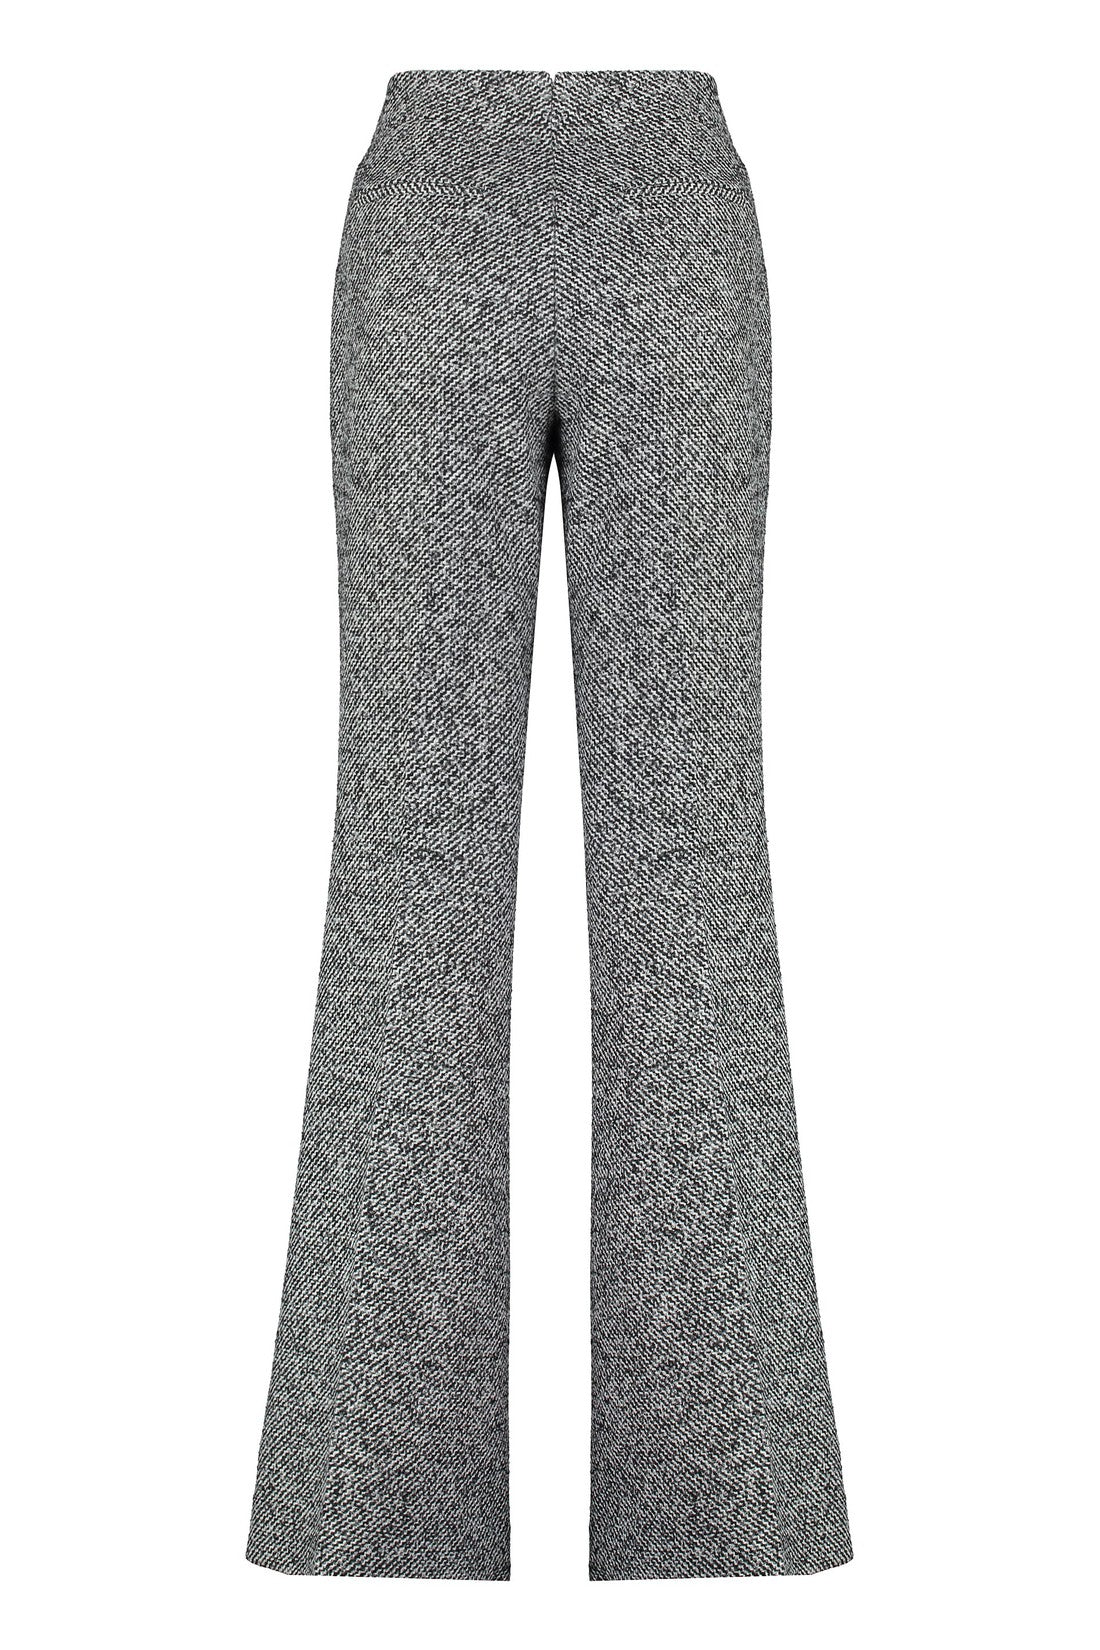 Tom Ford-OUTLET-SALE-Tweed trousers-ARCHIVIST